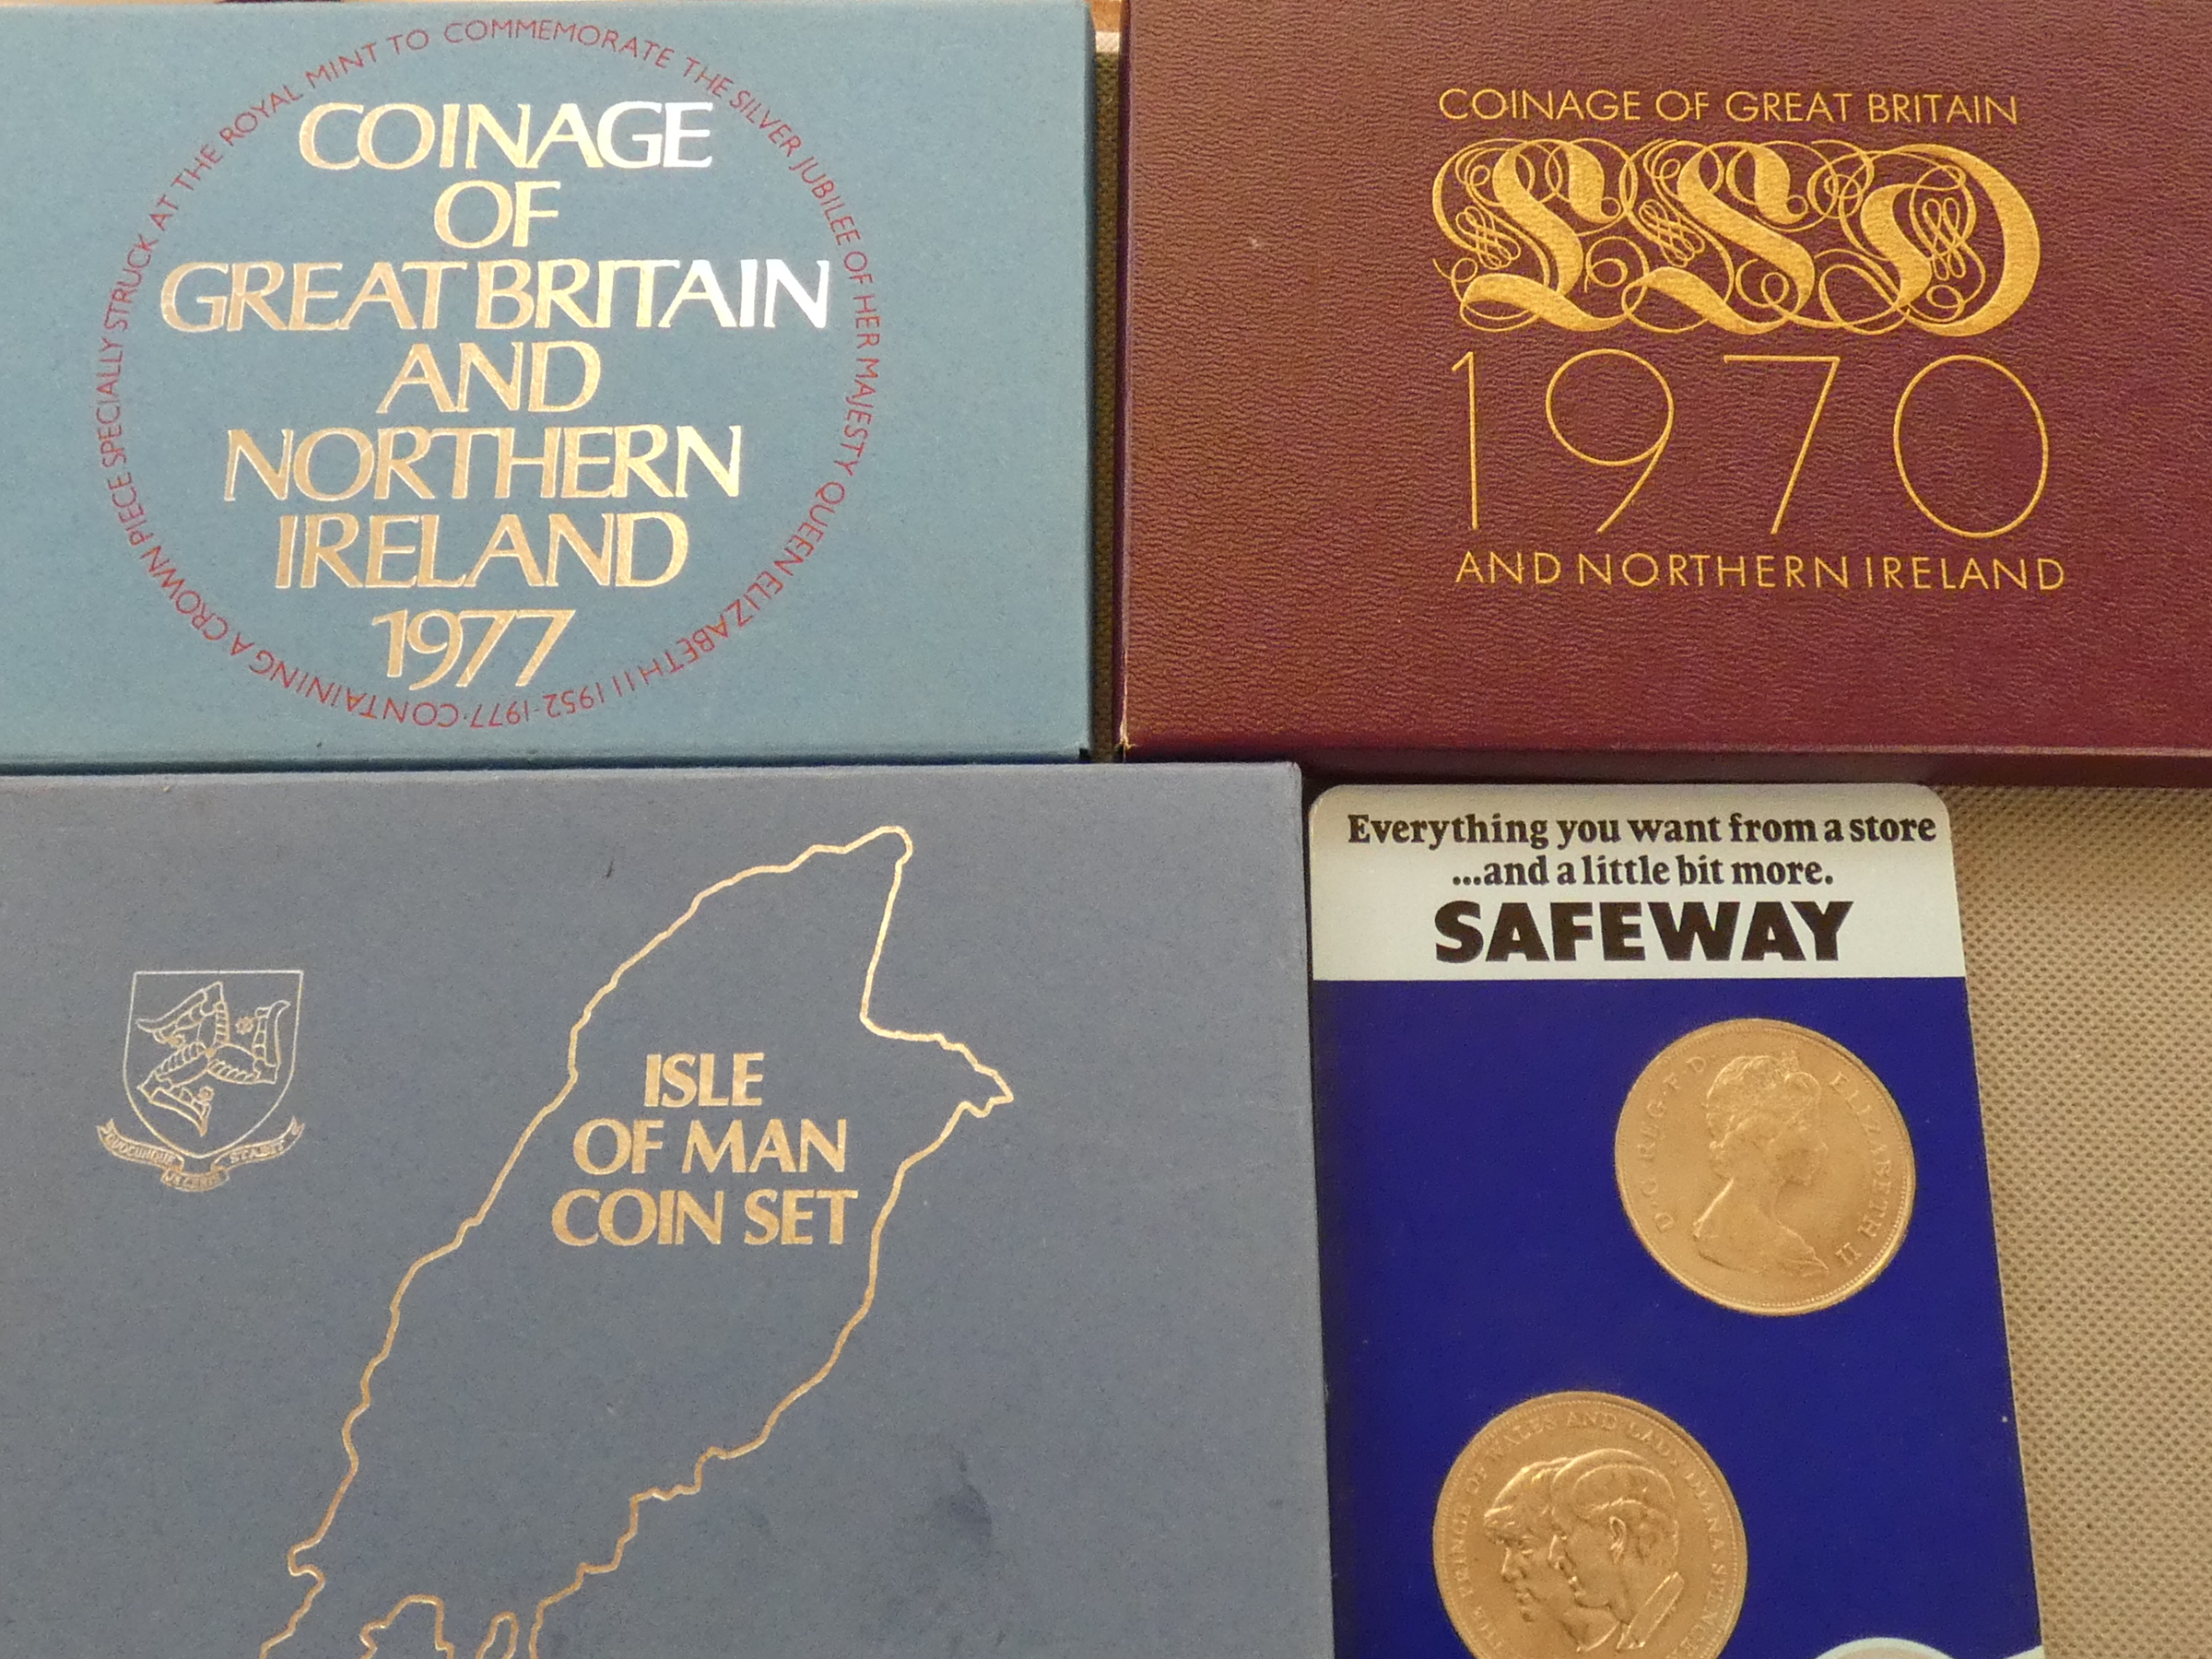 Coinage of Great Britain Set, Isle of Man Coin Set